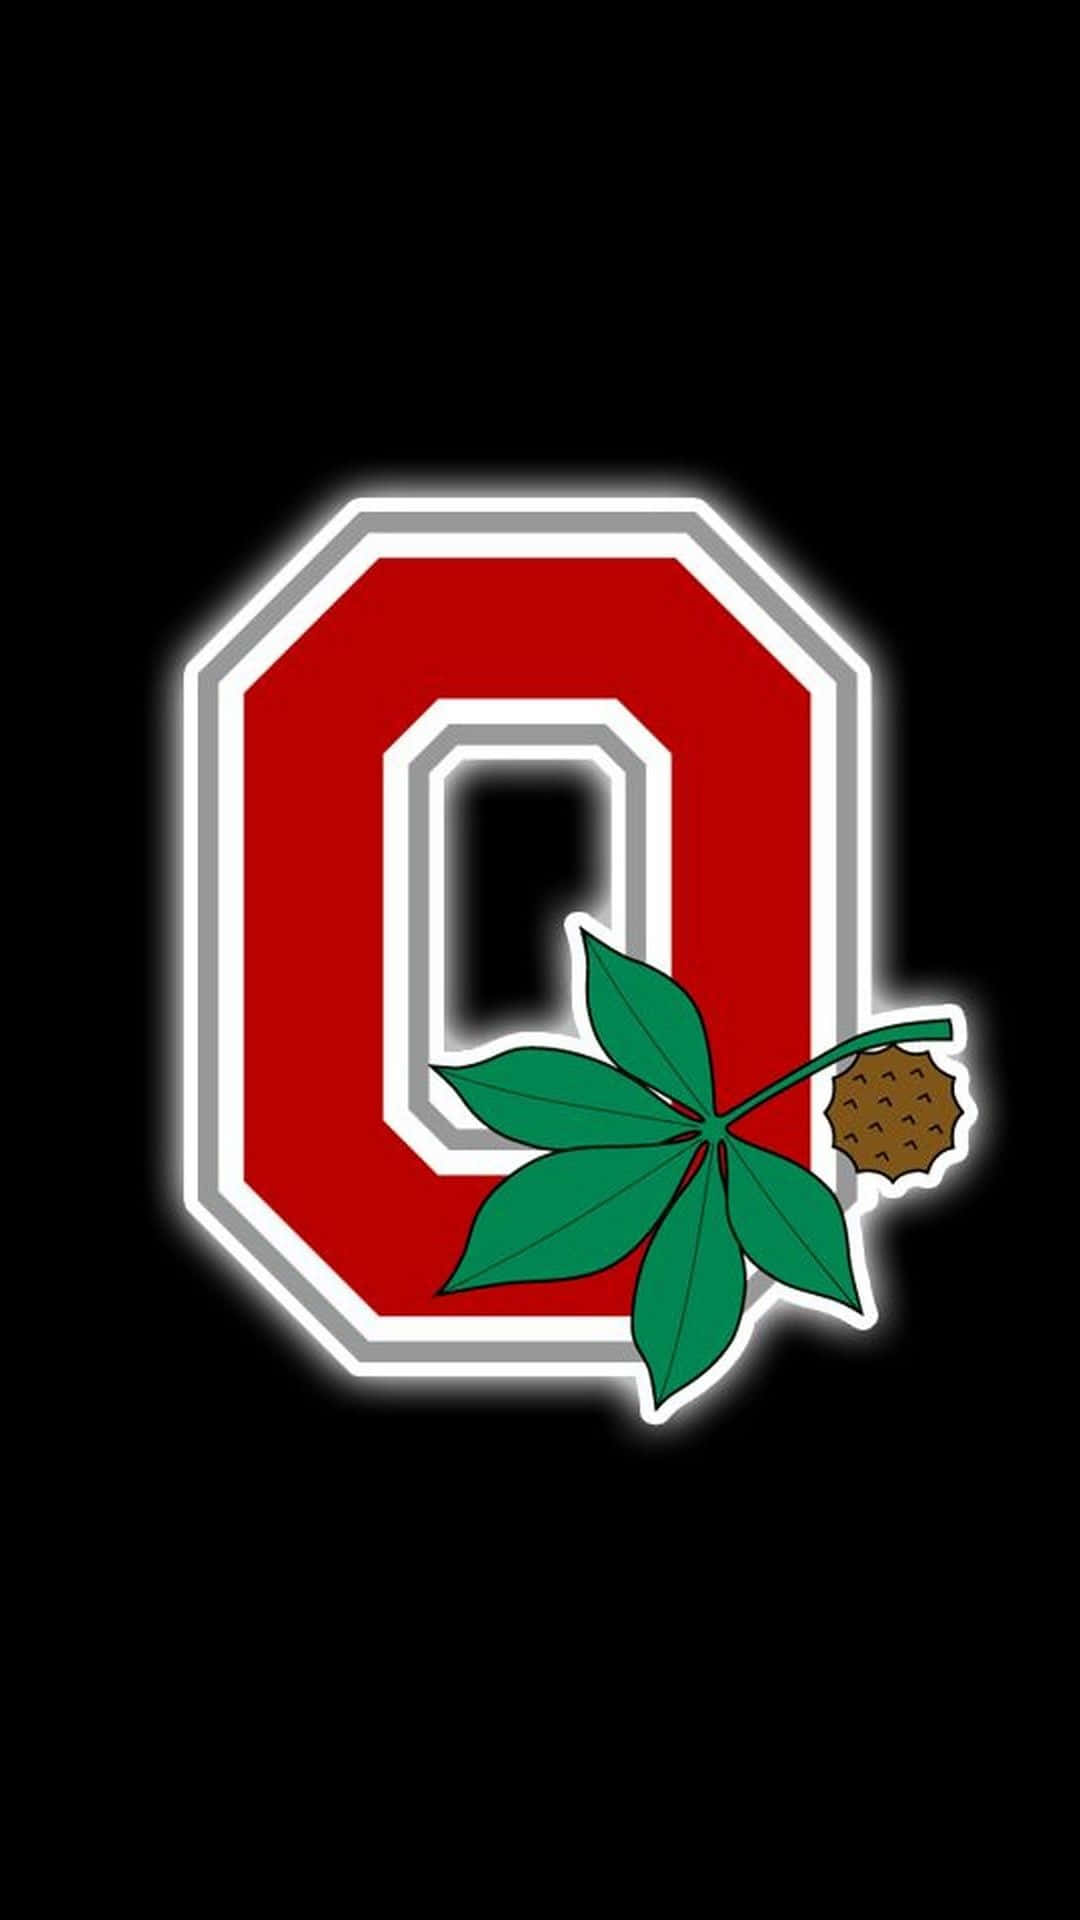 Show your Ohio State pride with an iPhone Wallpaper